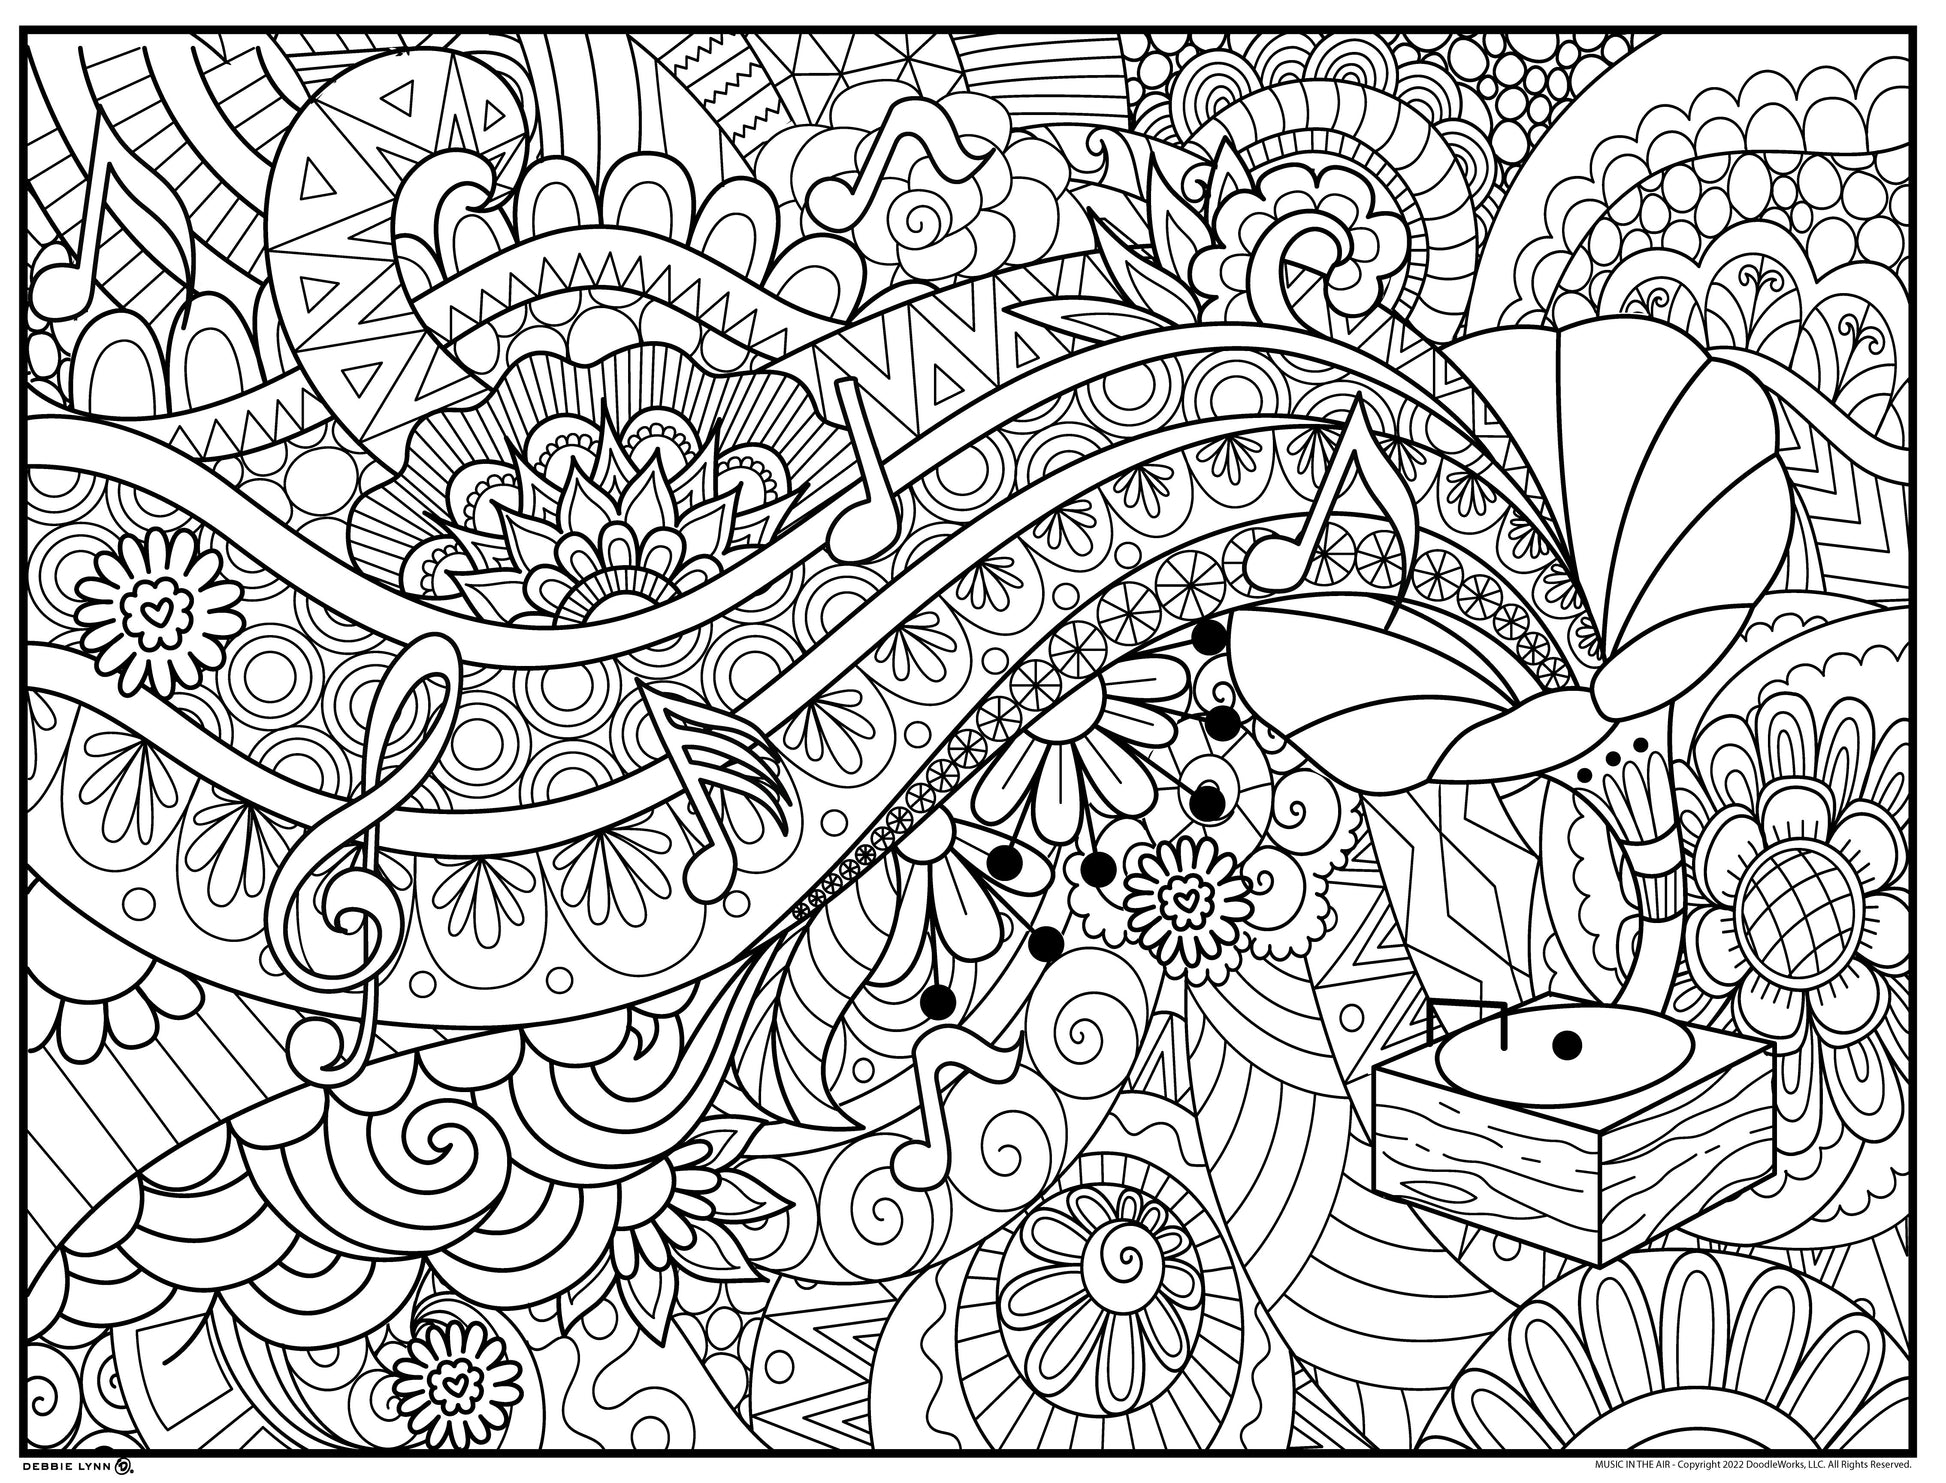 Music In the Air Personalized Giant Coloring Poster 48x63